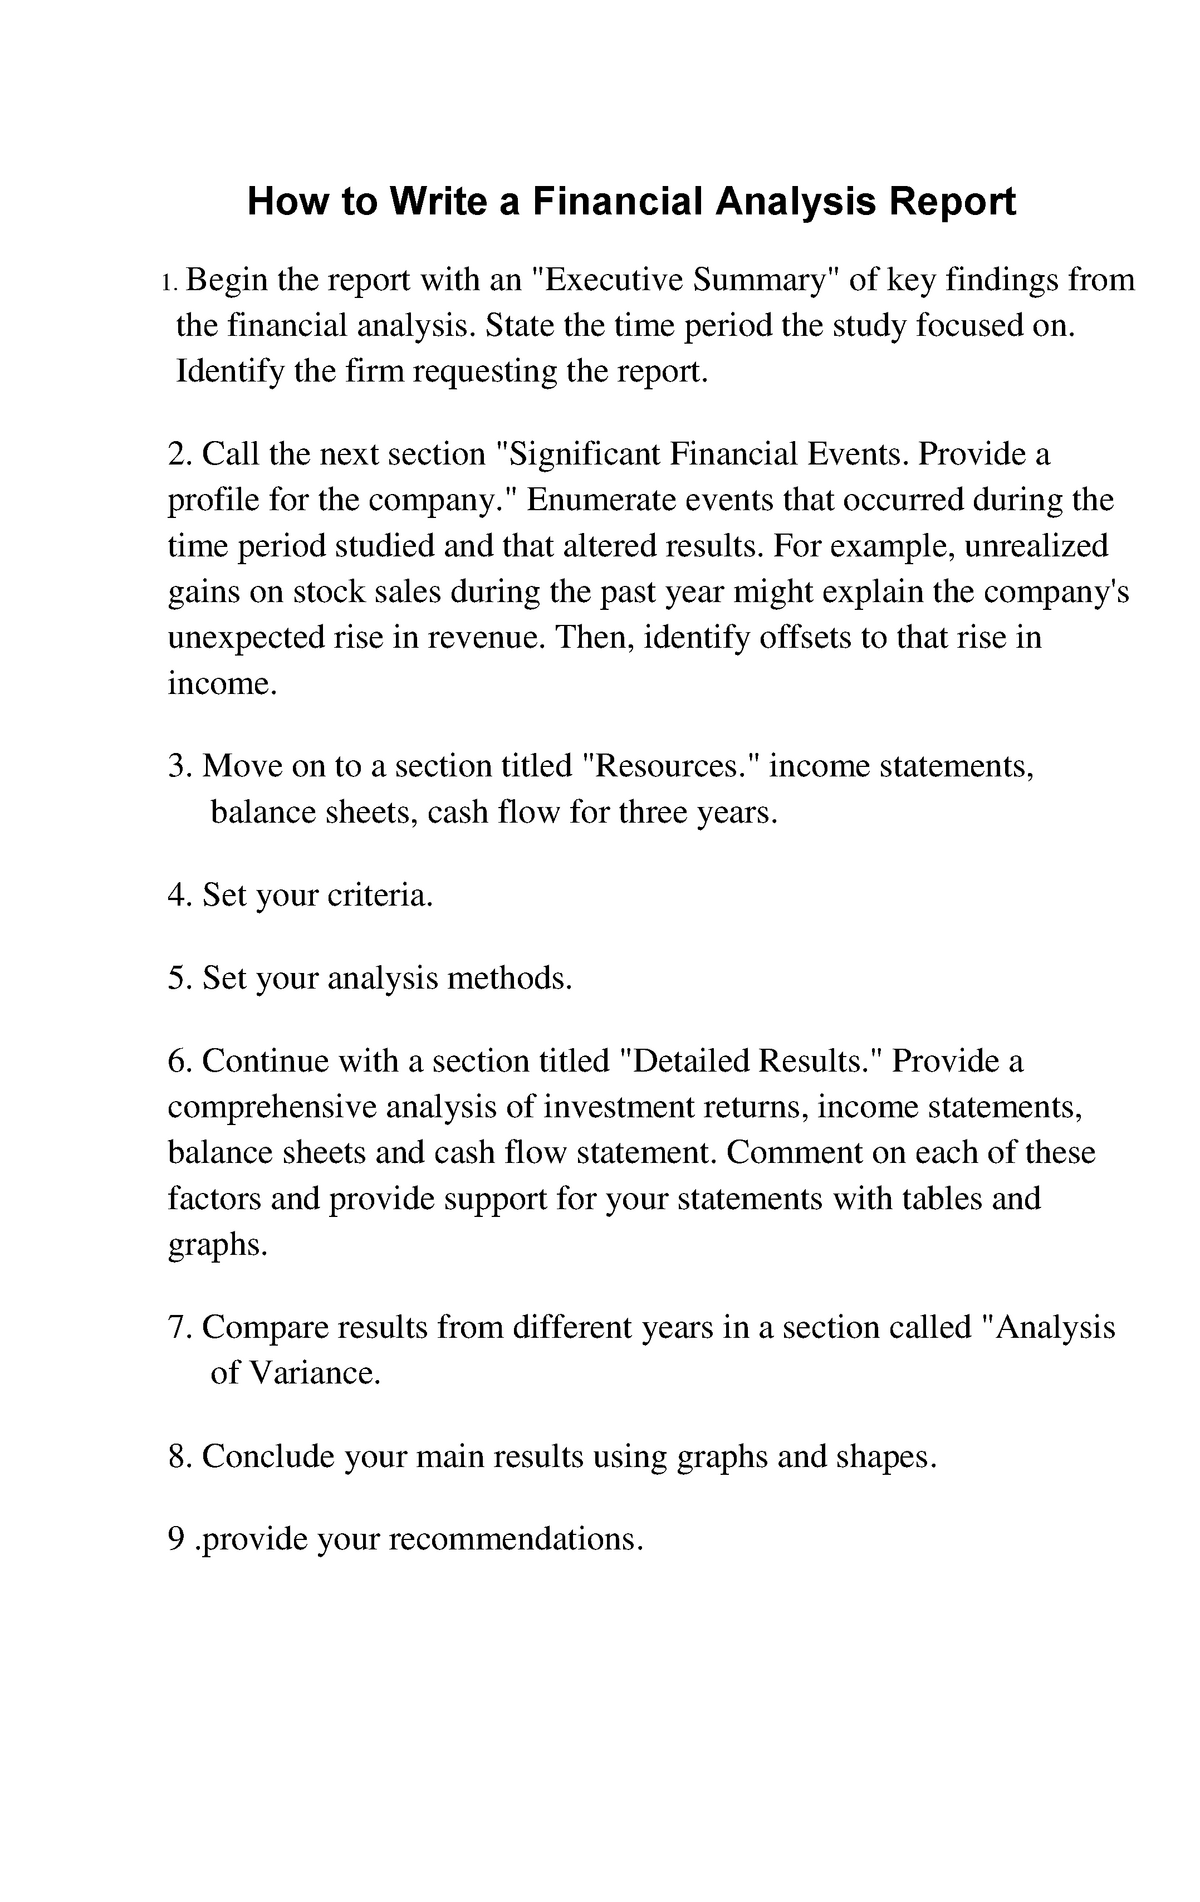 How to Write a Financial Analysis Report 19 - How to Write a Financial  Analysis Report Begin the - StuDocu